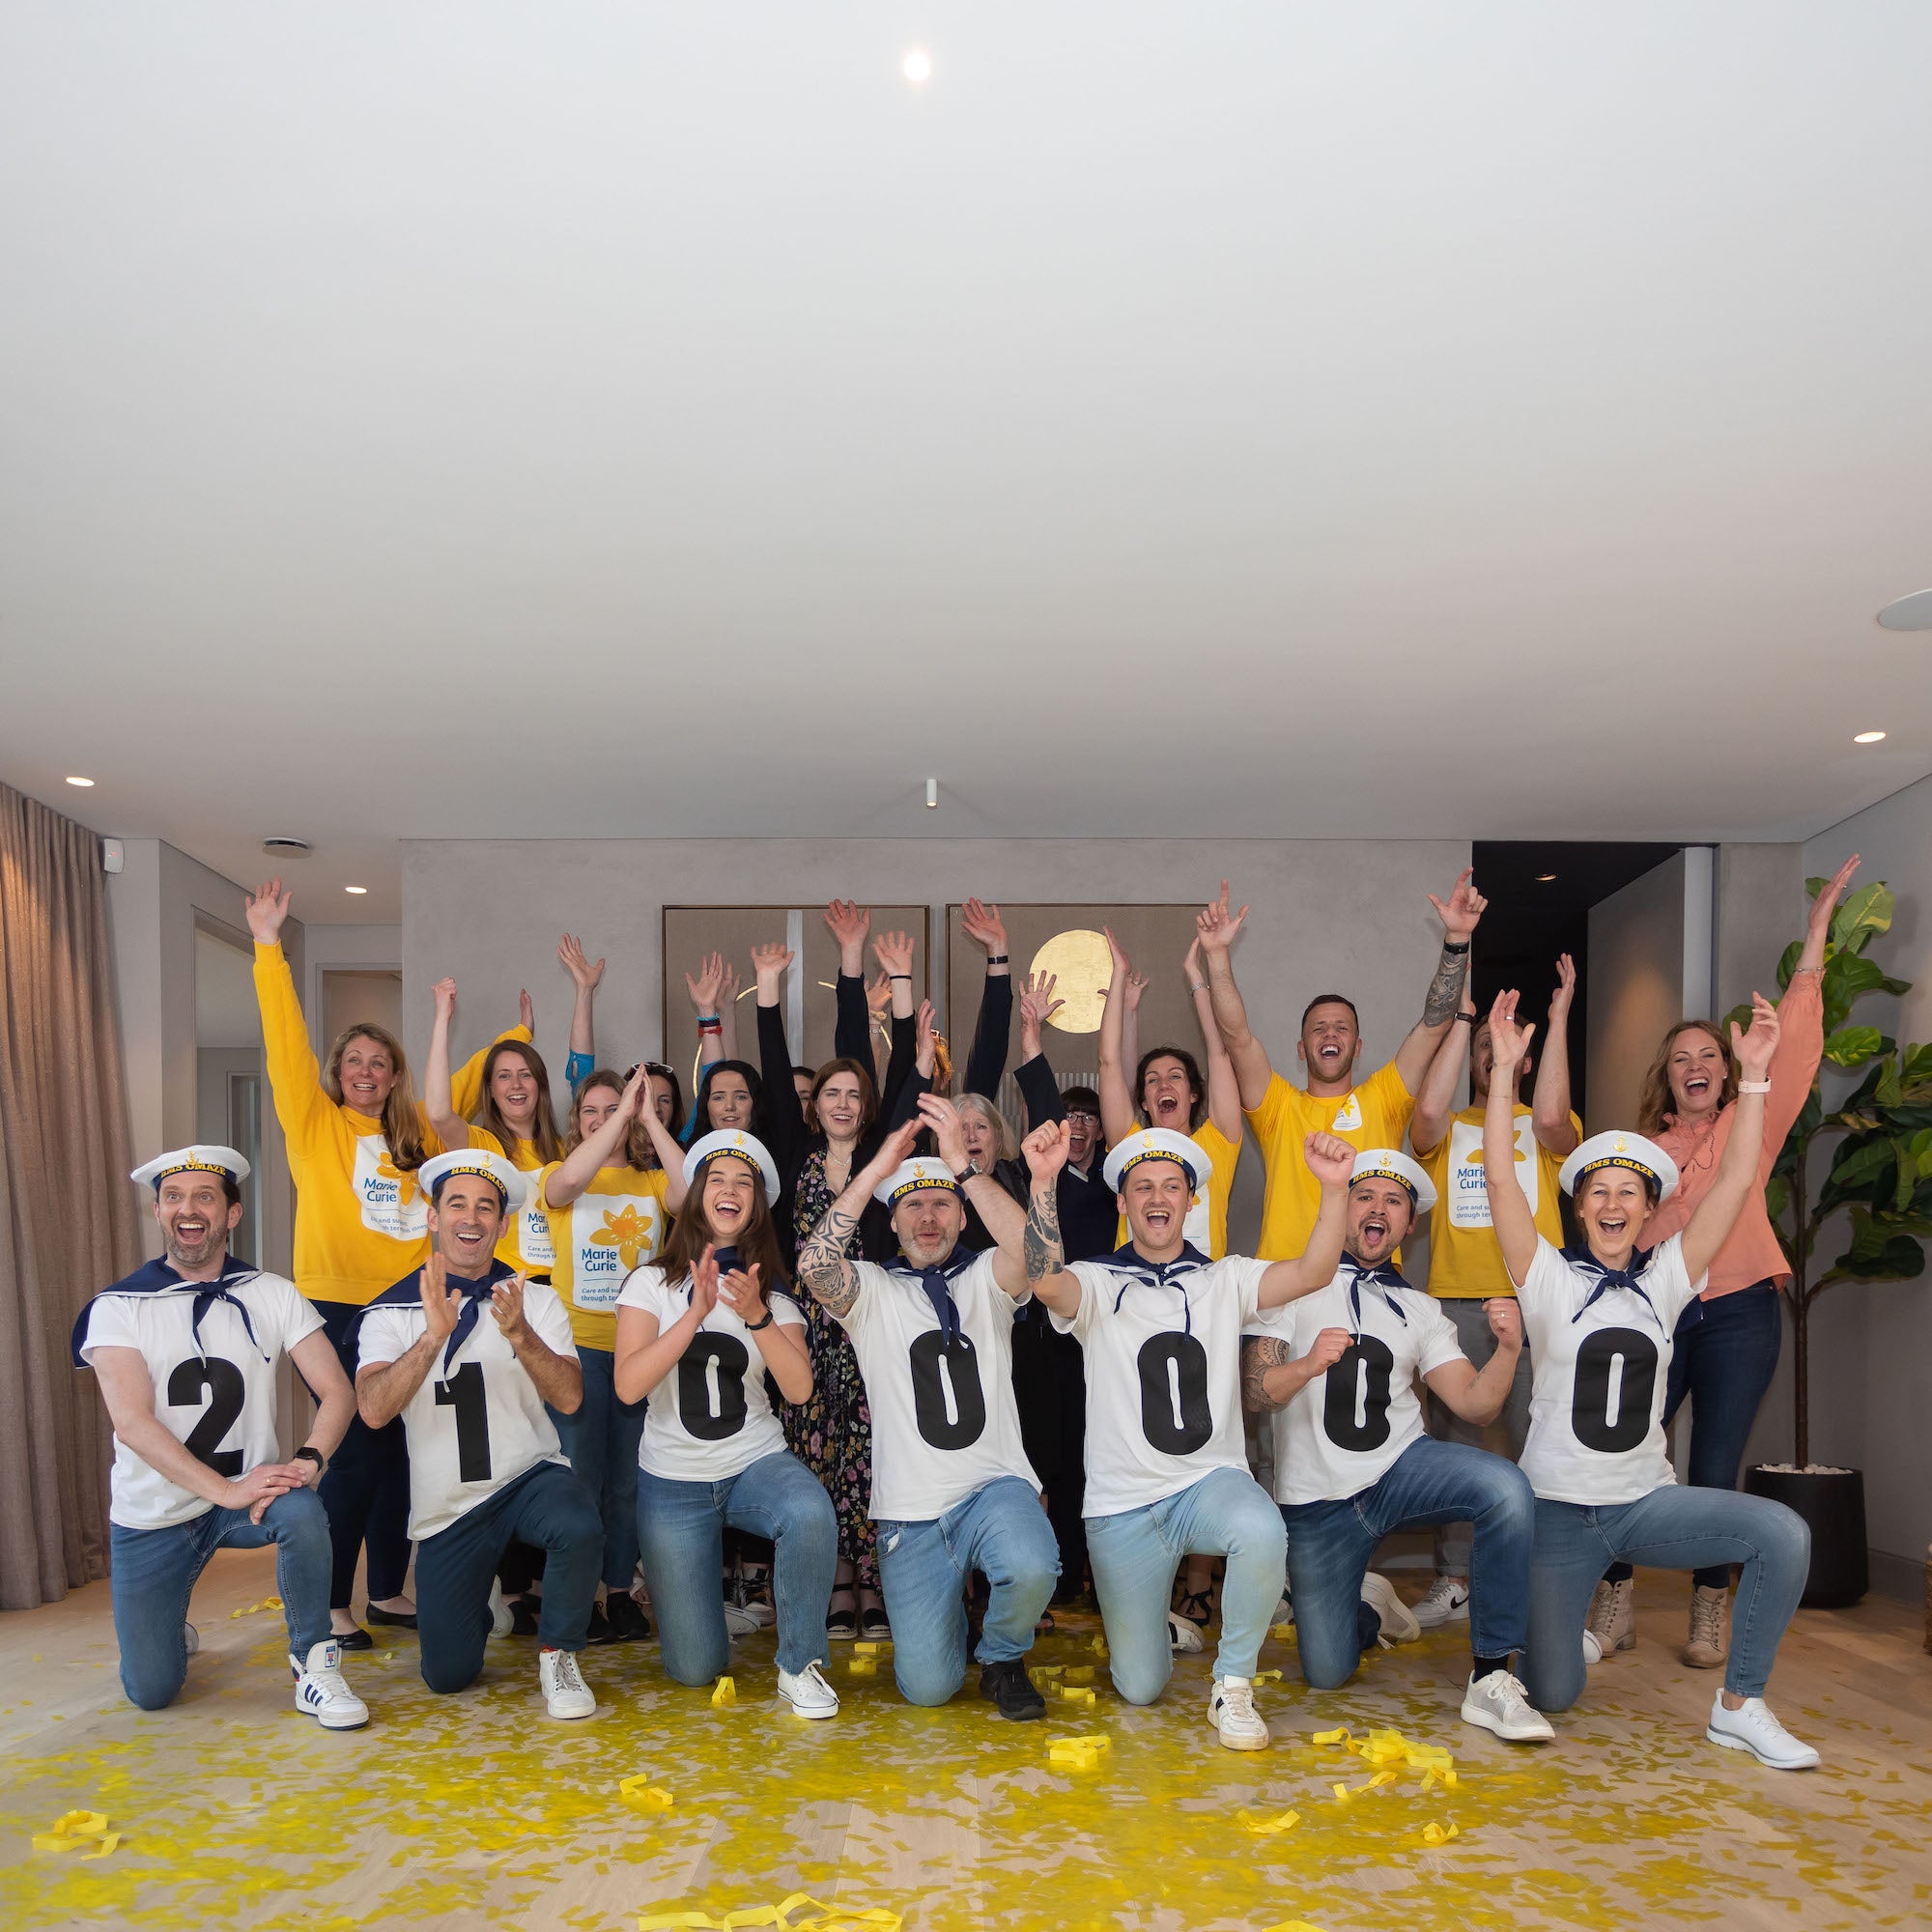 Together We Raised £2,100,000 for Marie Curie